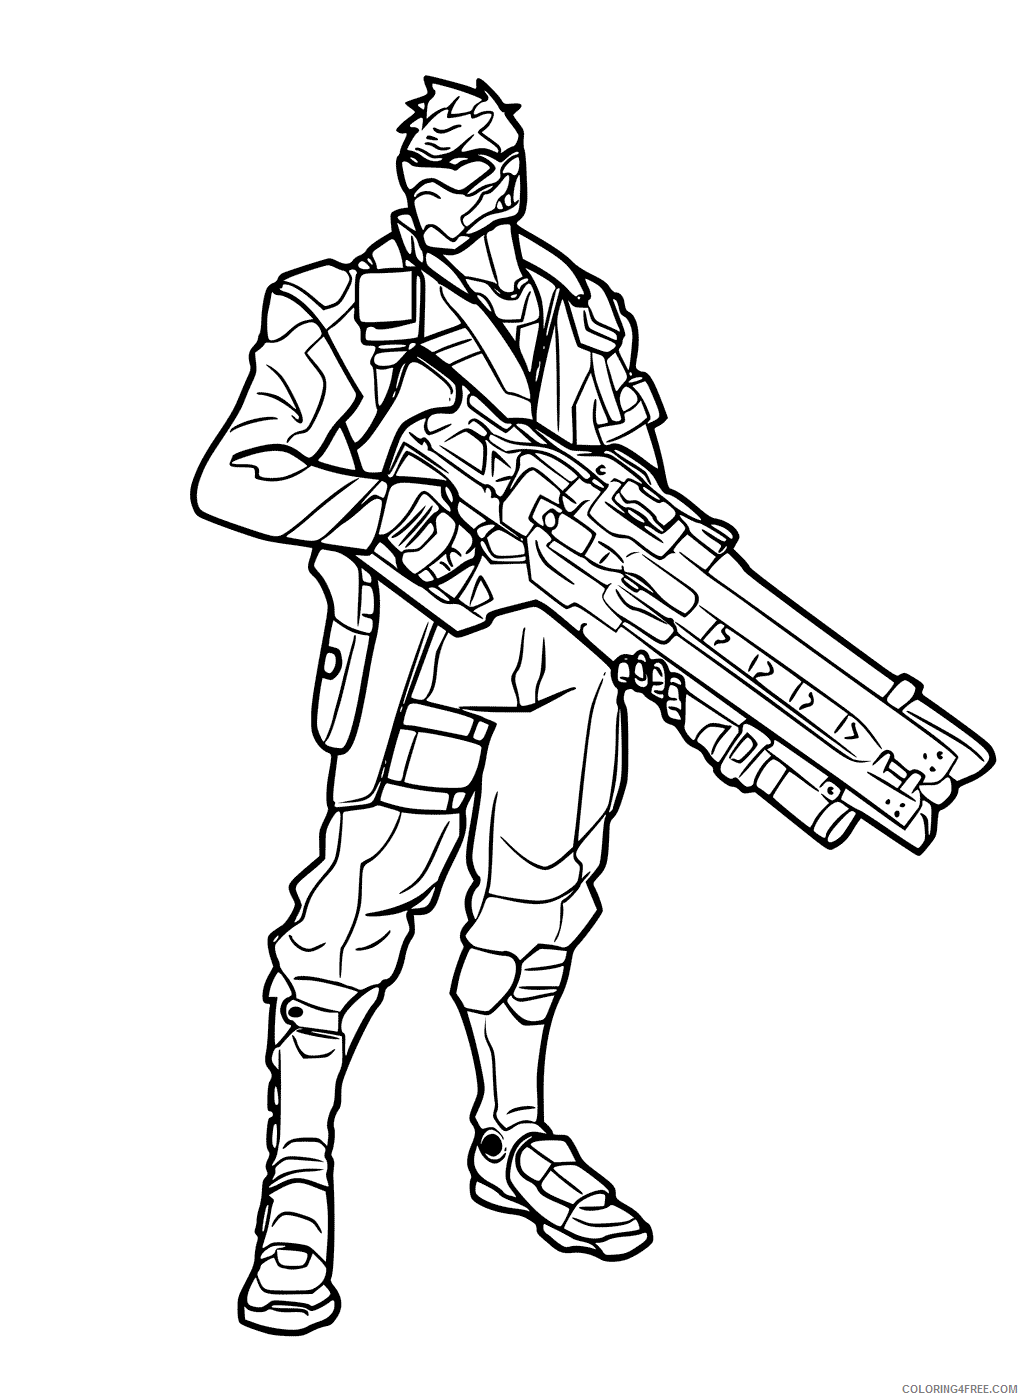 Soldier Coloring Pages for boys Soldier 76 Overwatch Printable 2020 0927 Coloring4free